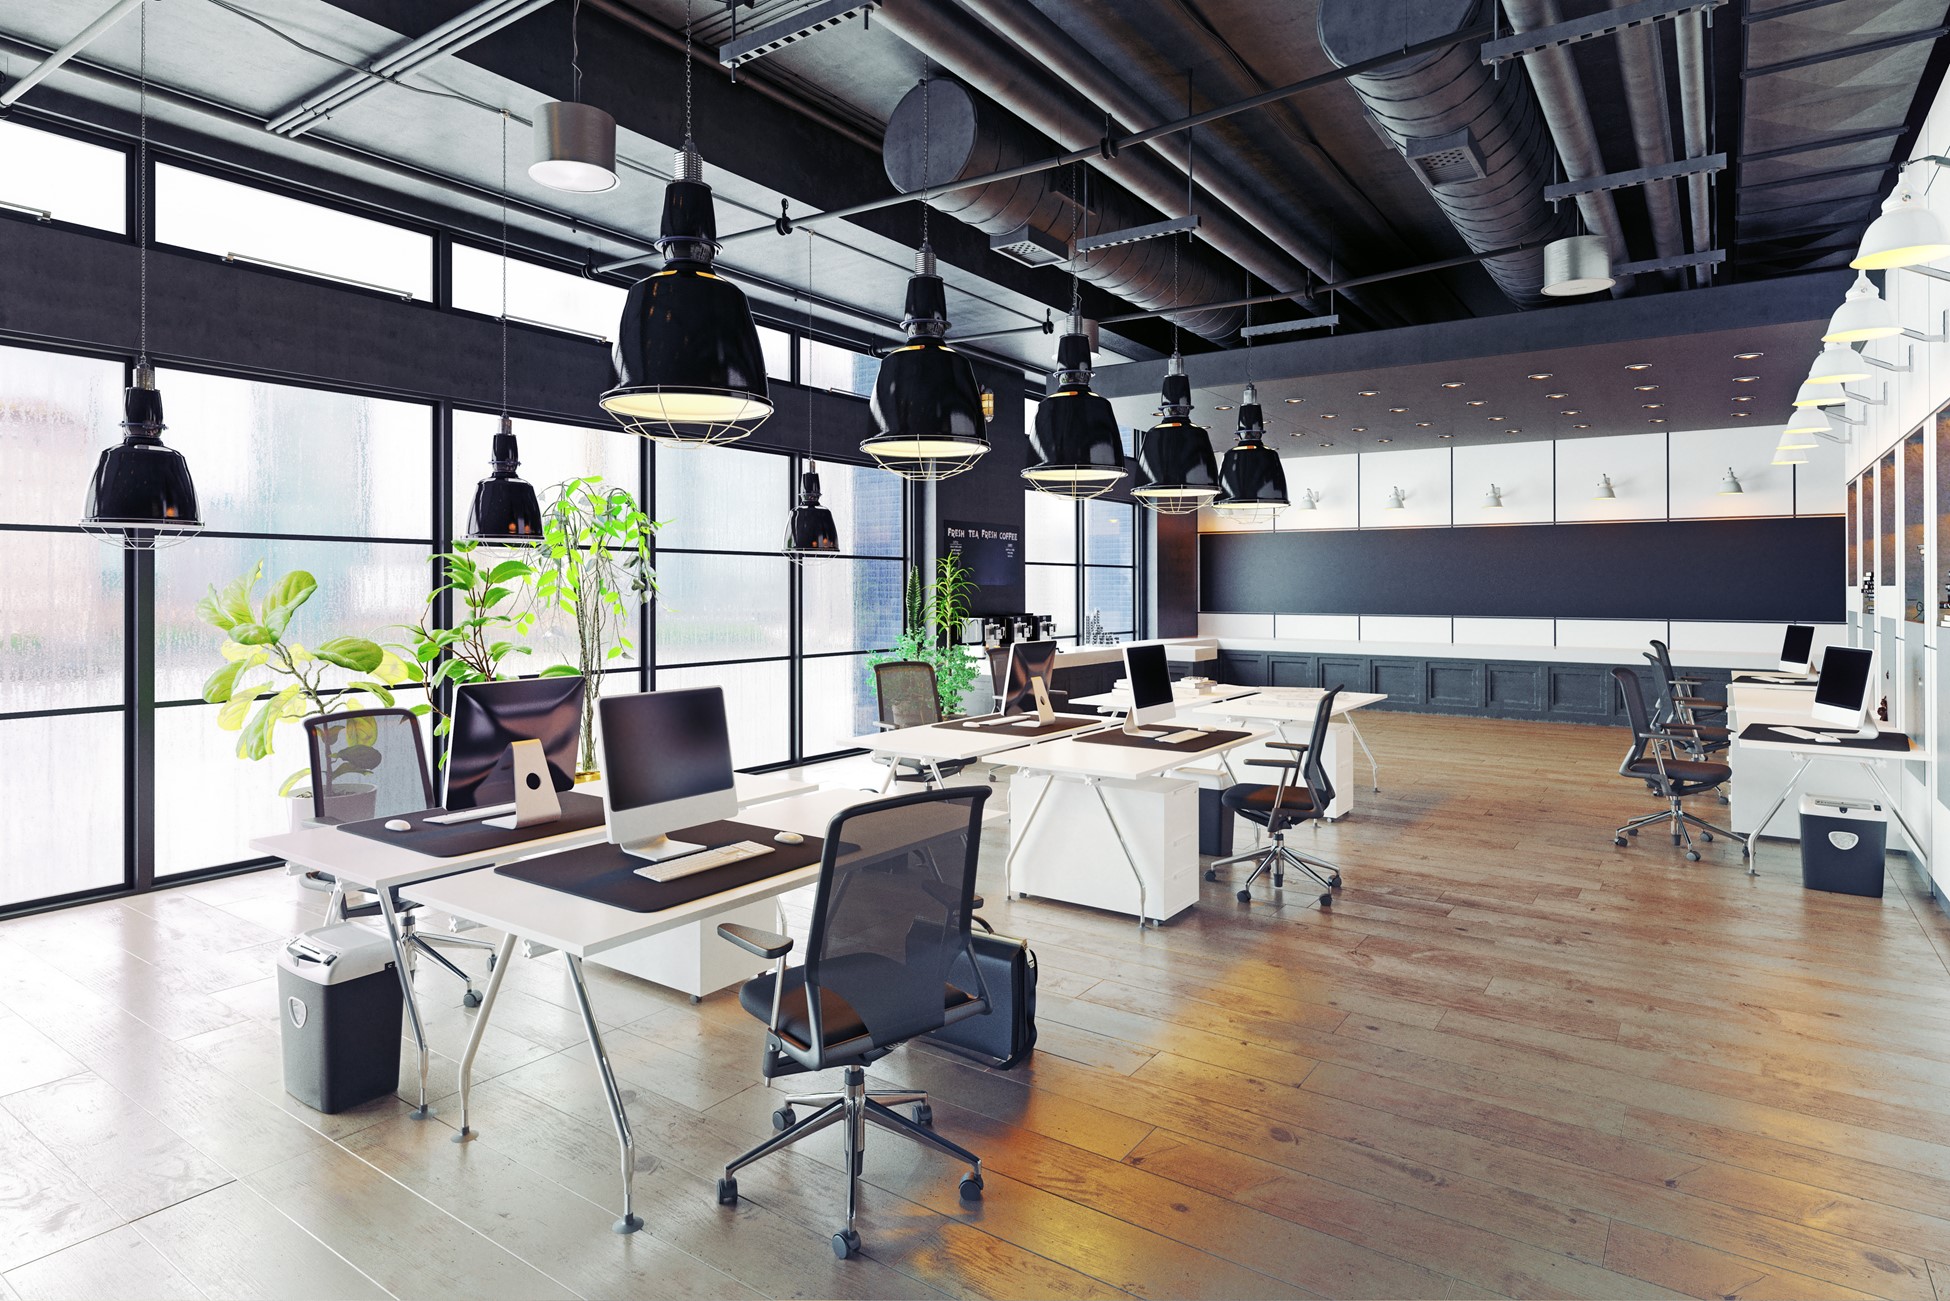 How can office lighting affect your mood?